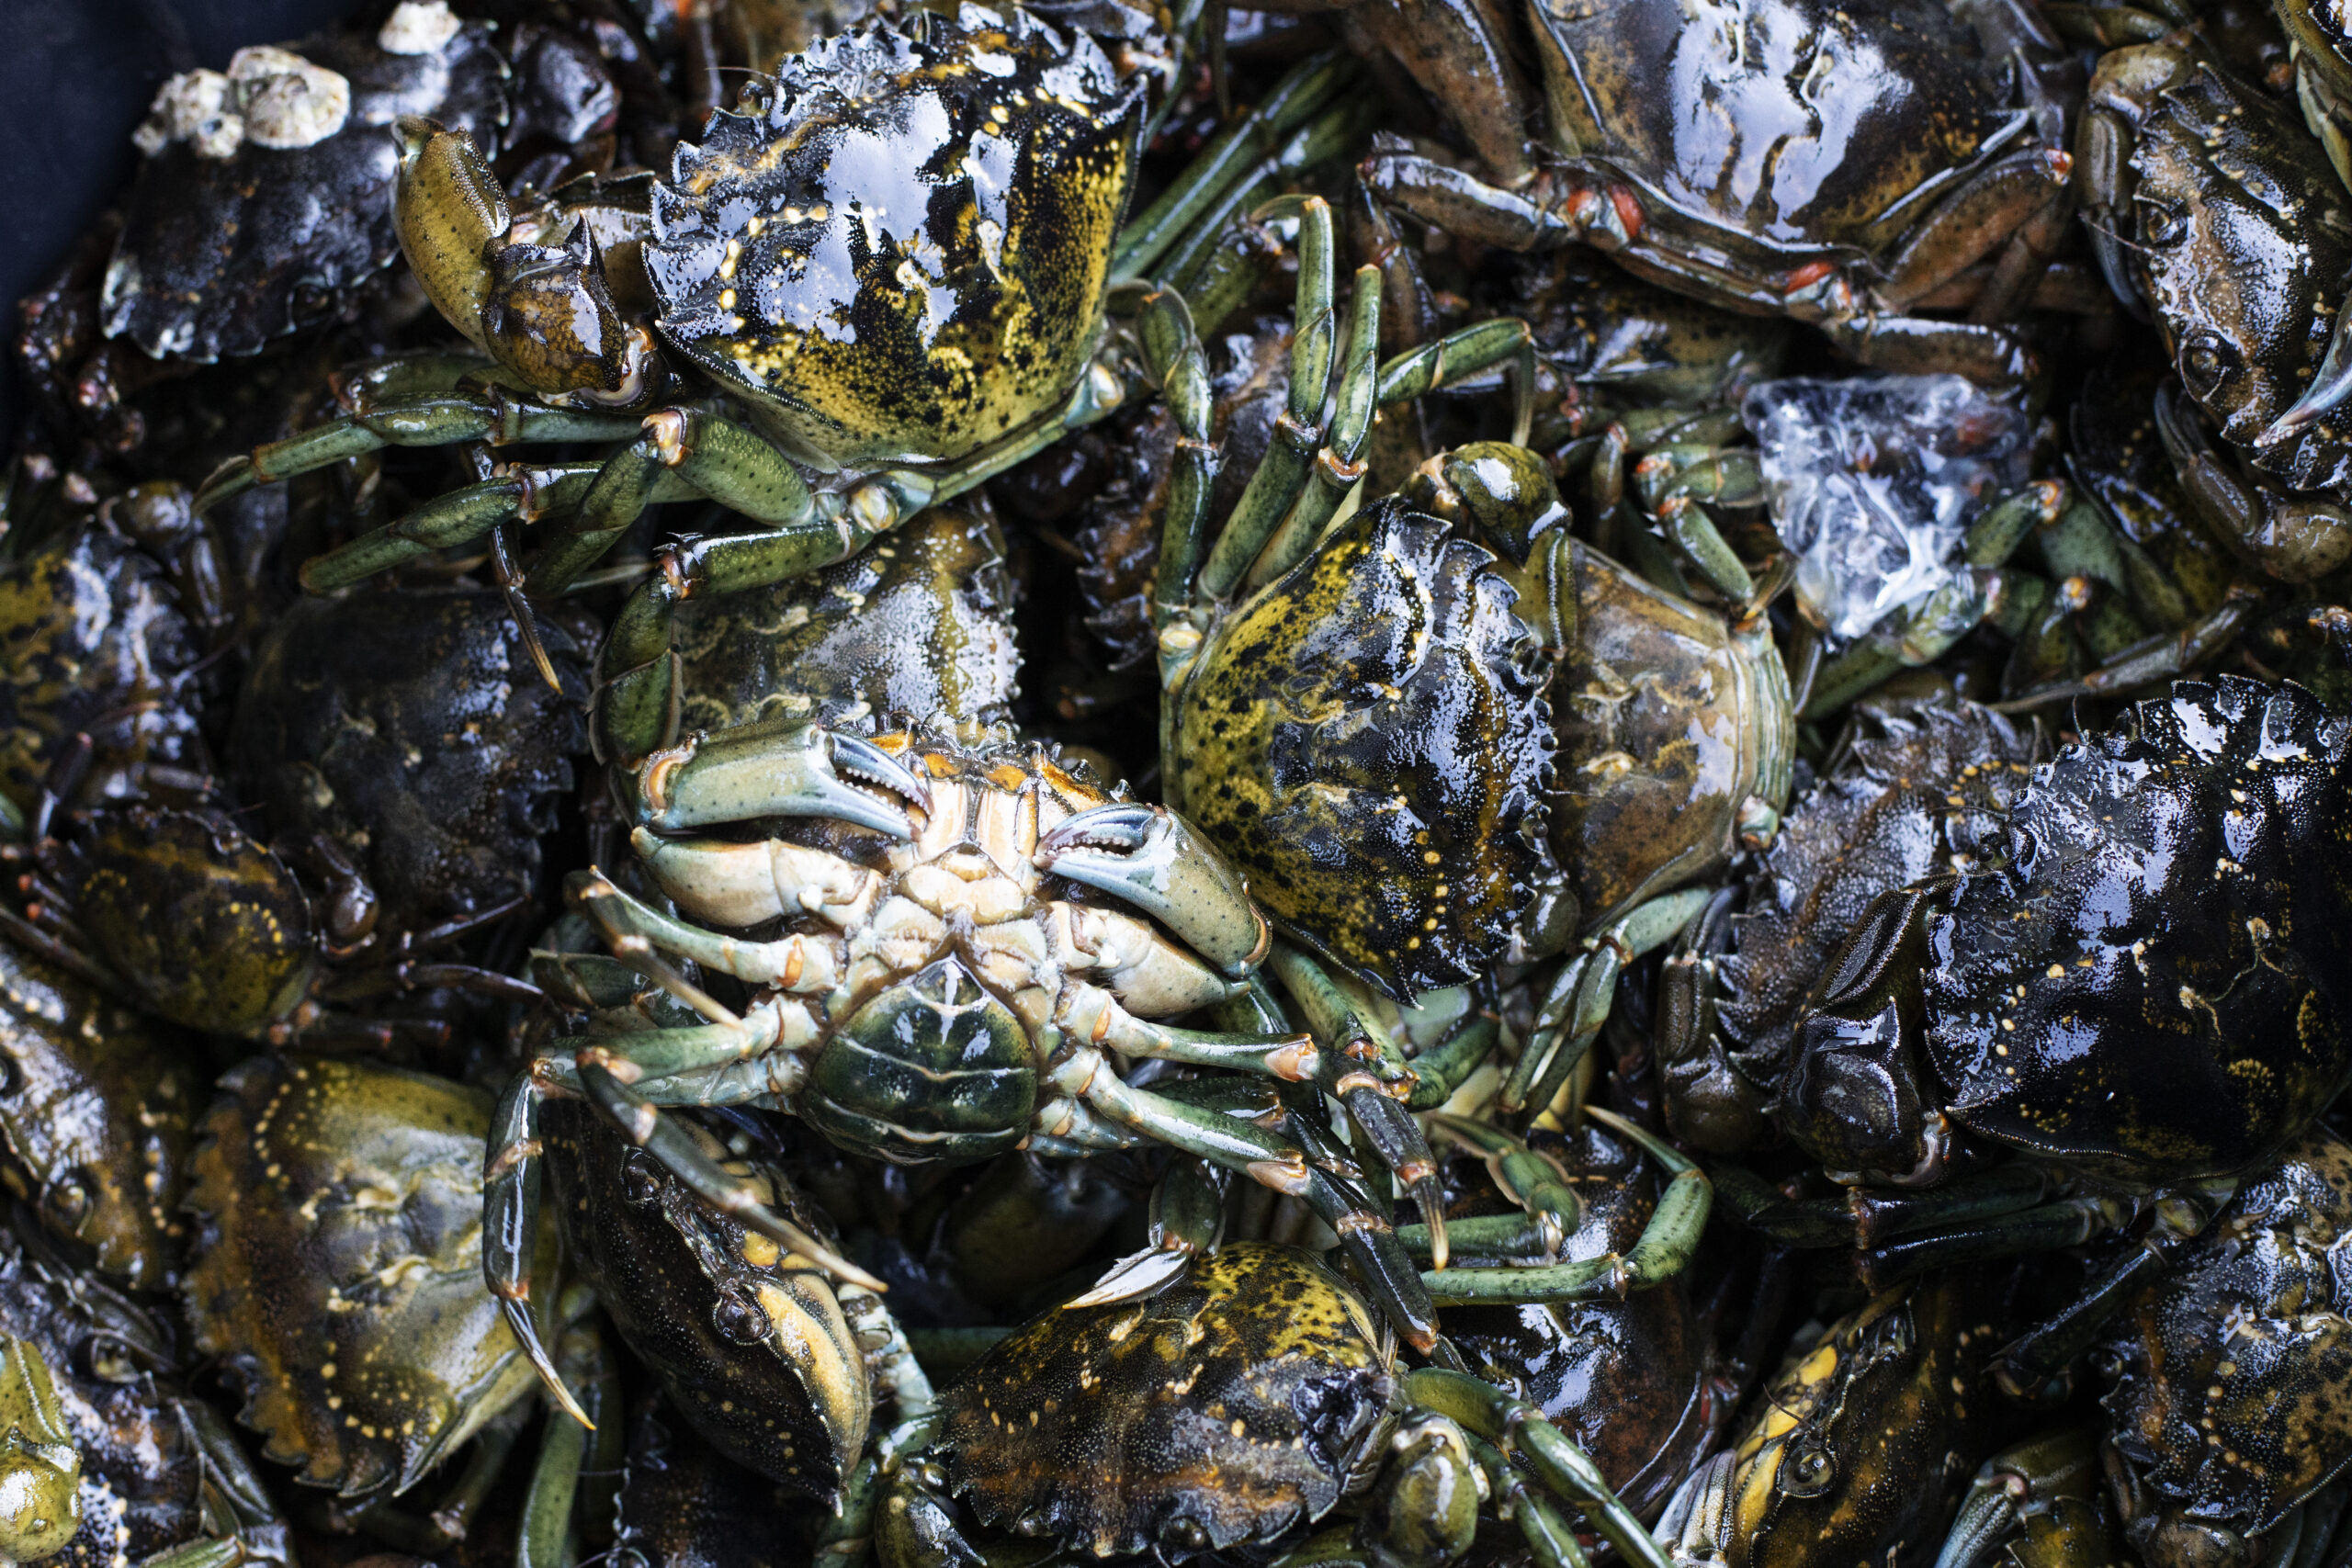 European green crabs piled in a bucket for transport to a freezer